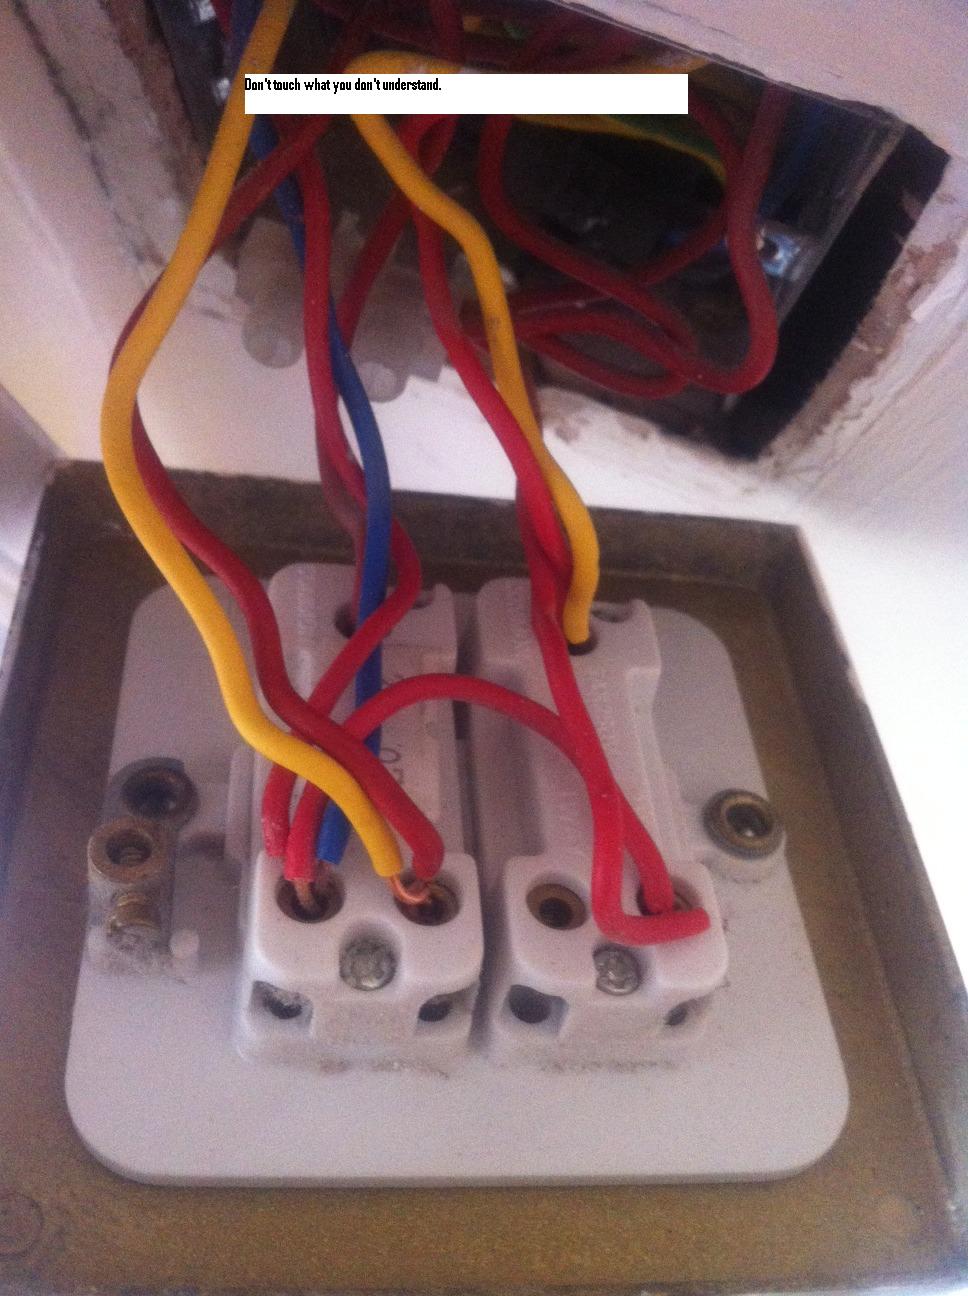 Urgent Help Required With Wiring Light Switch! - Page 1 - Homes, Gardens and DIY - PistonHeads